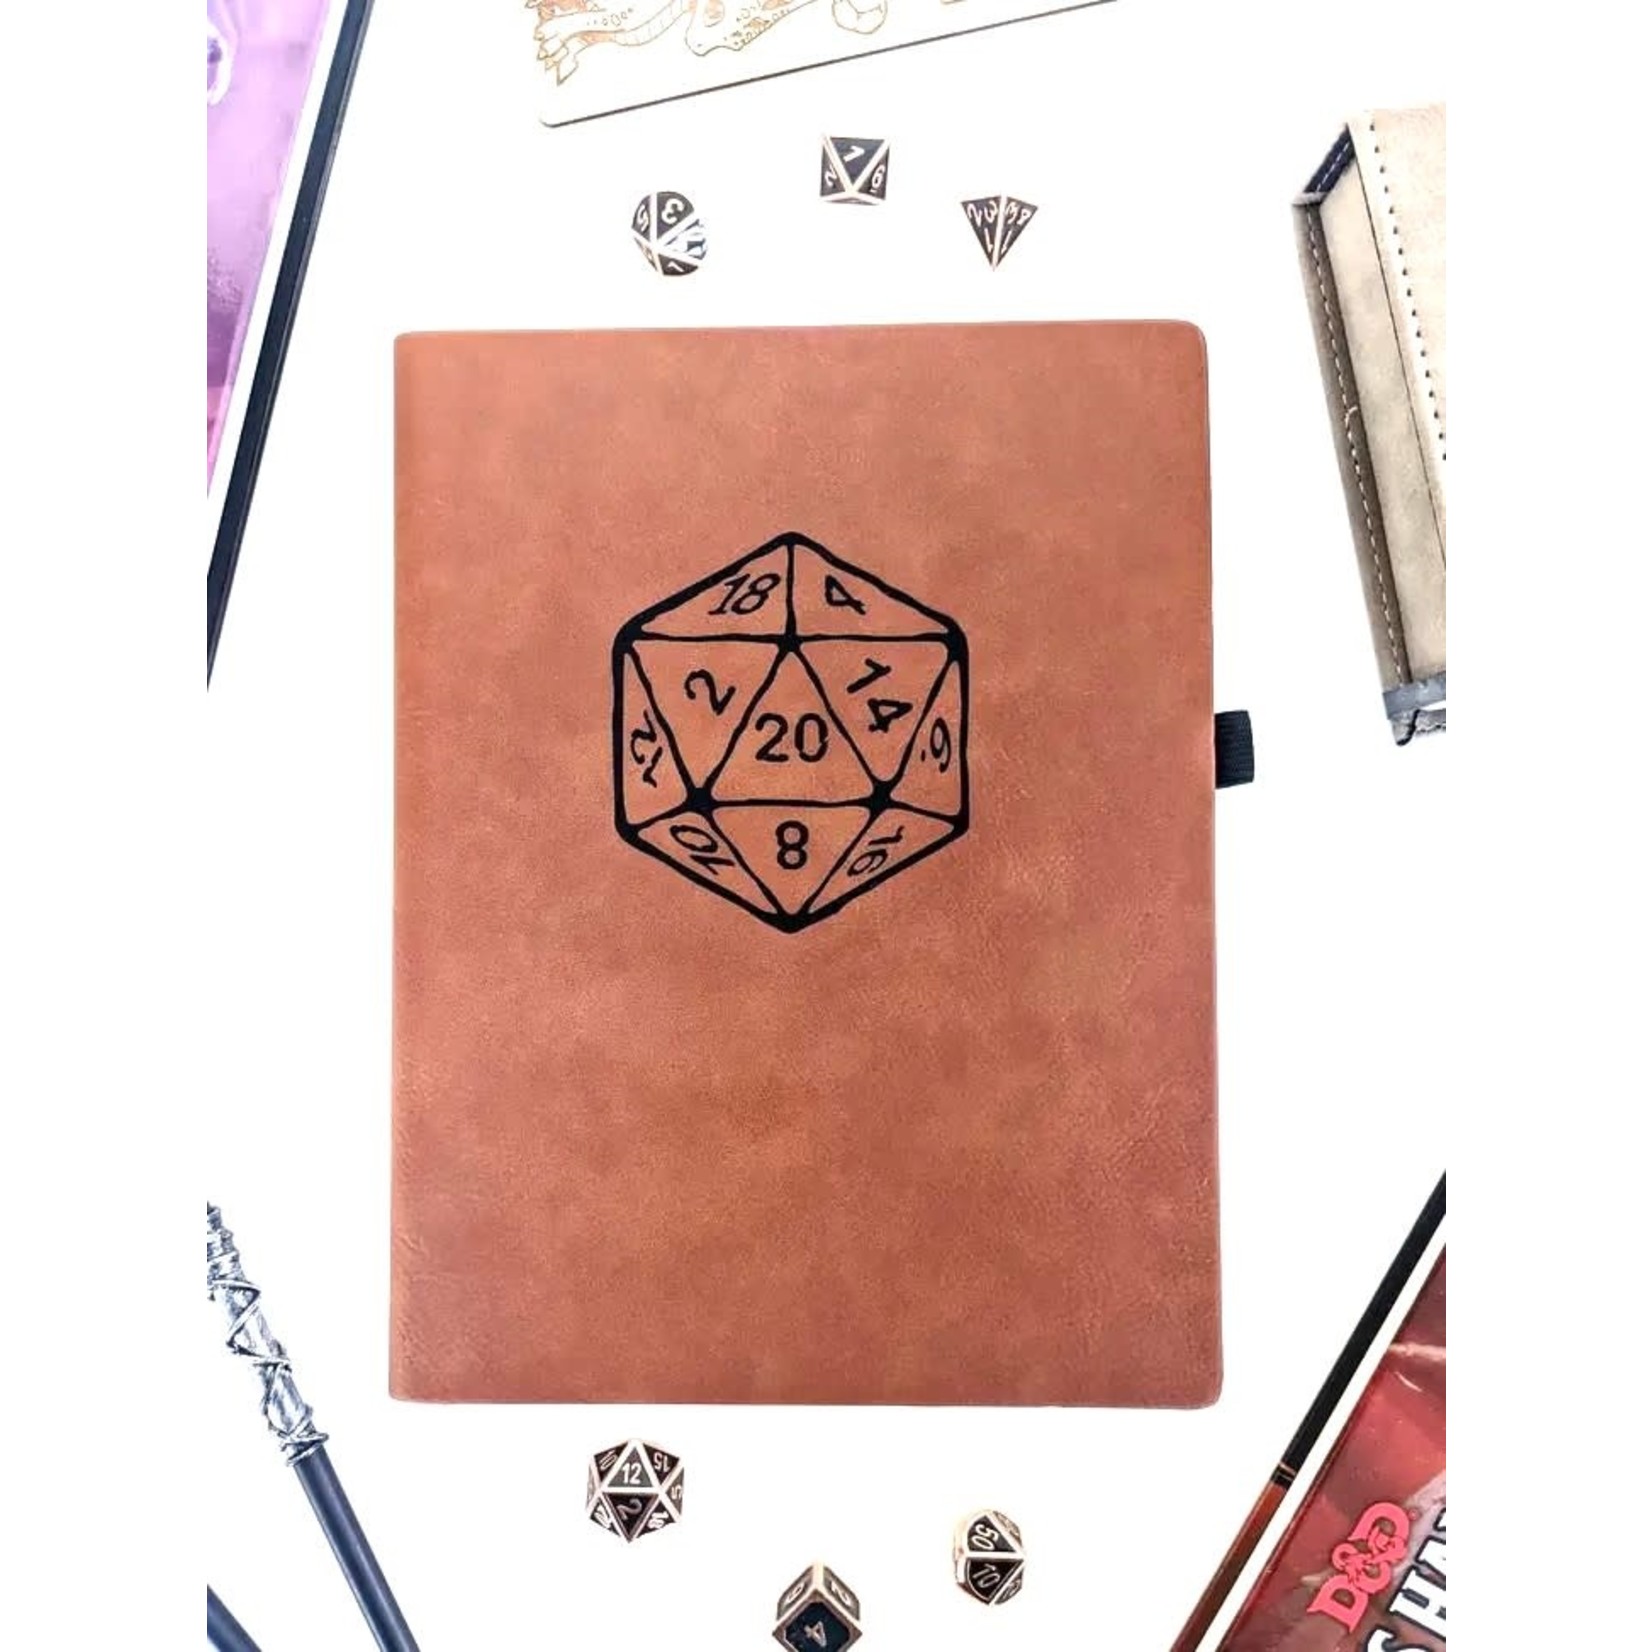 Vegan Leather Campaign Journals